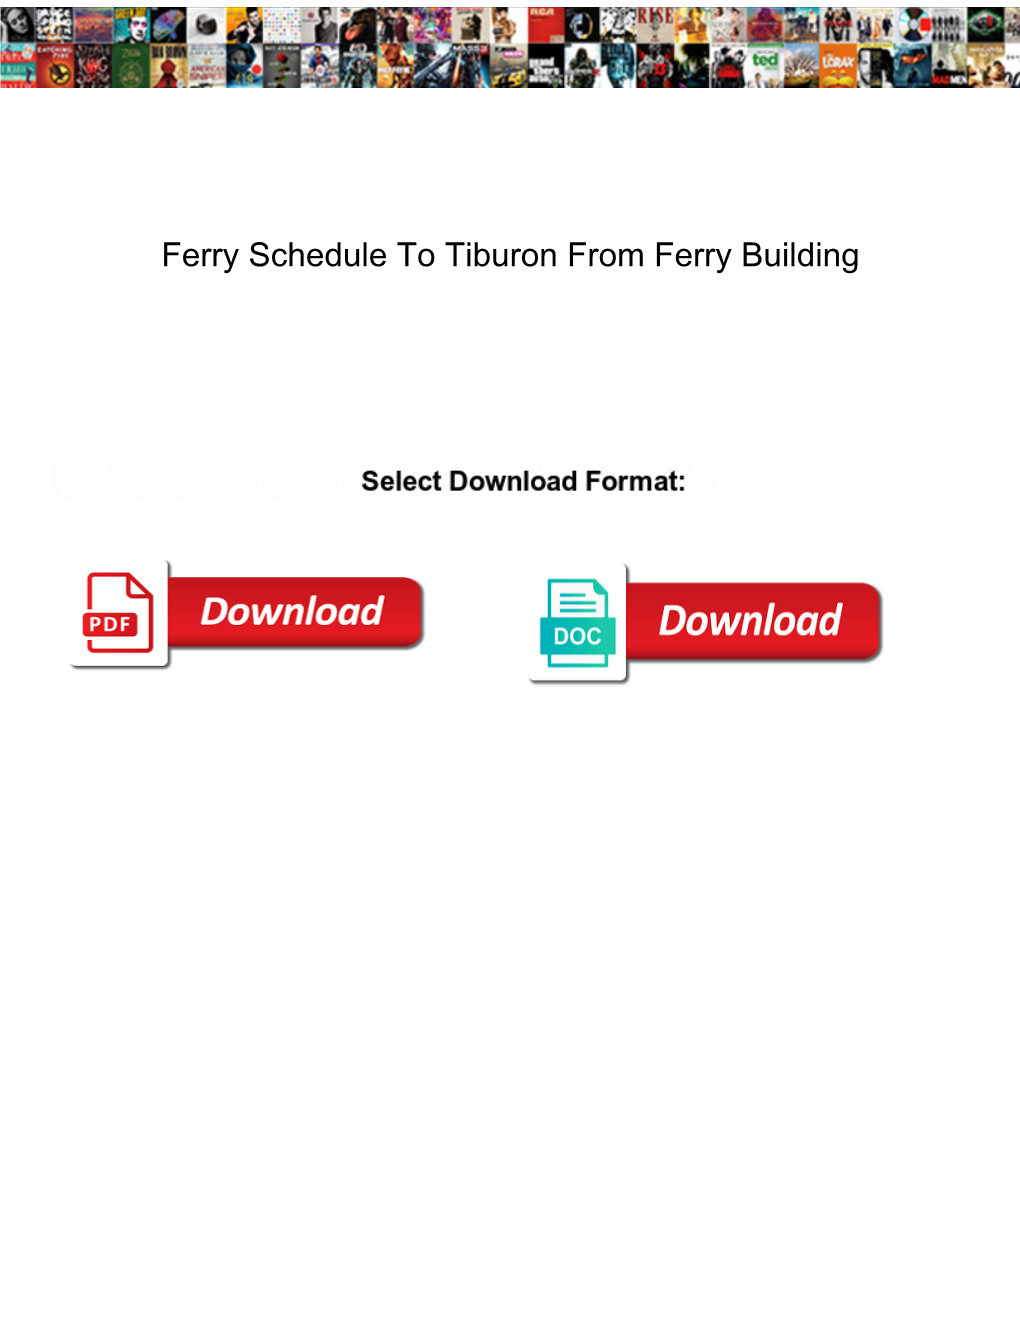 Ferry Schedule to Tiburon from Ferry Building